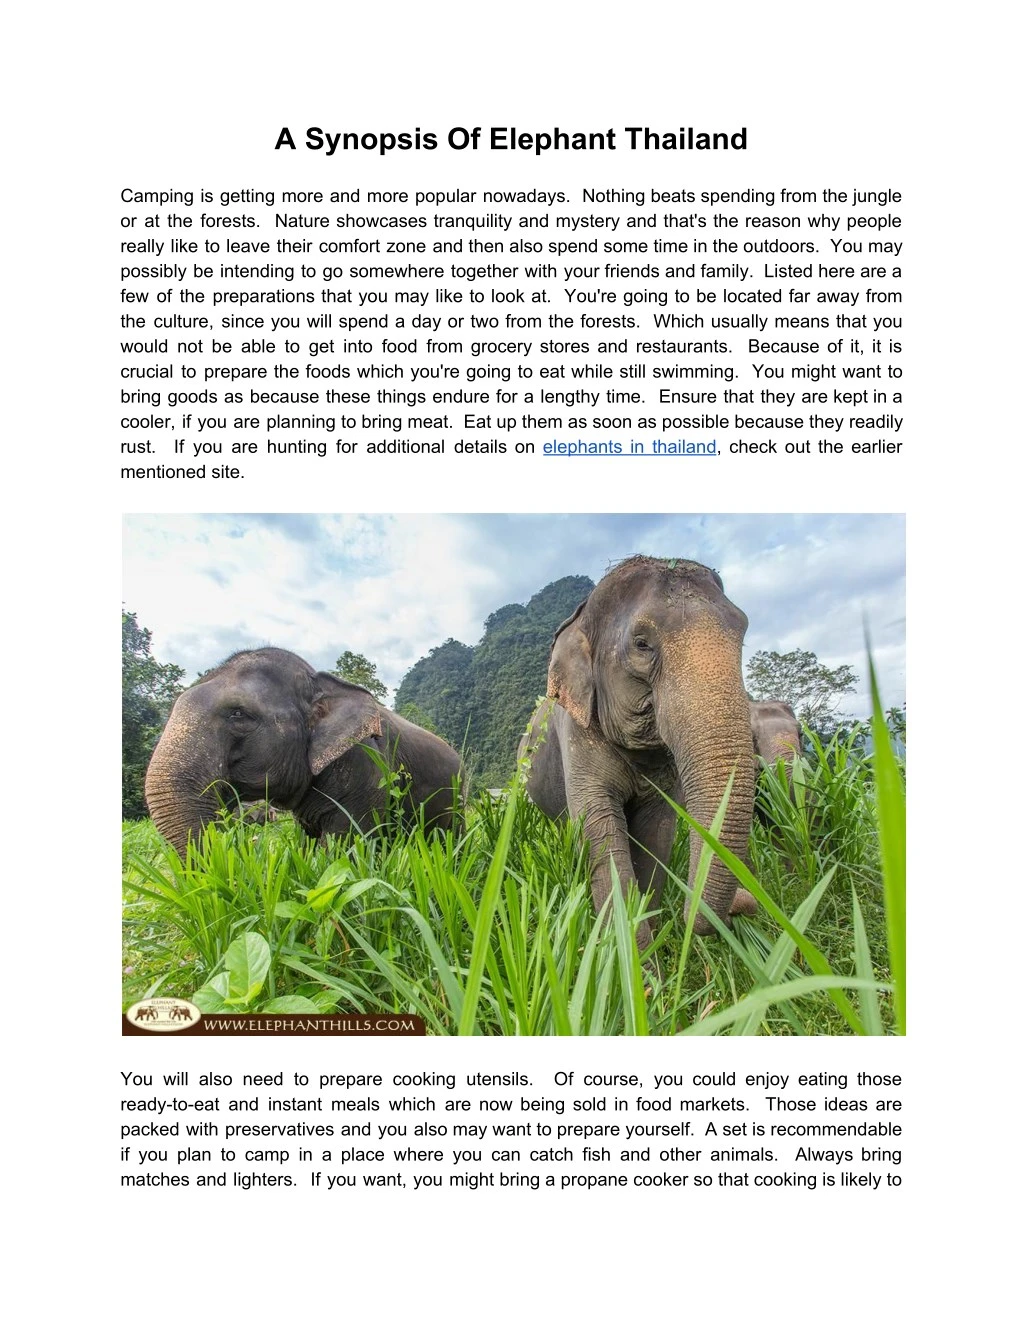 a synopsis of elephant thailand camping